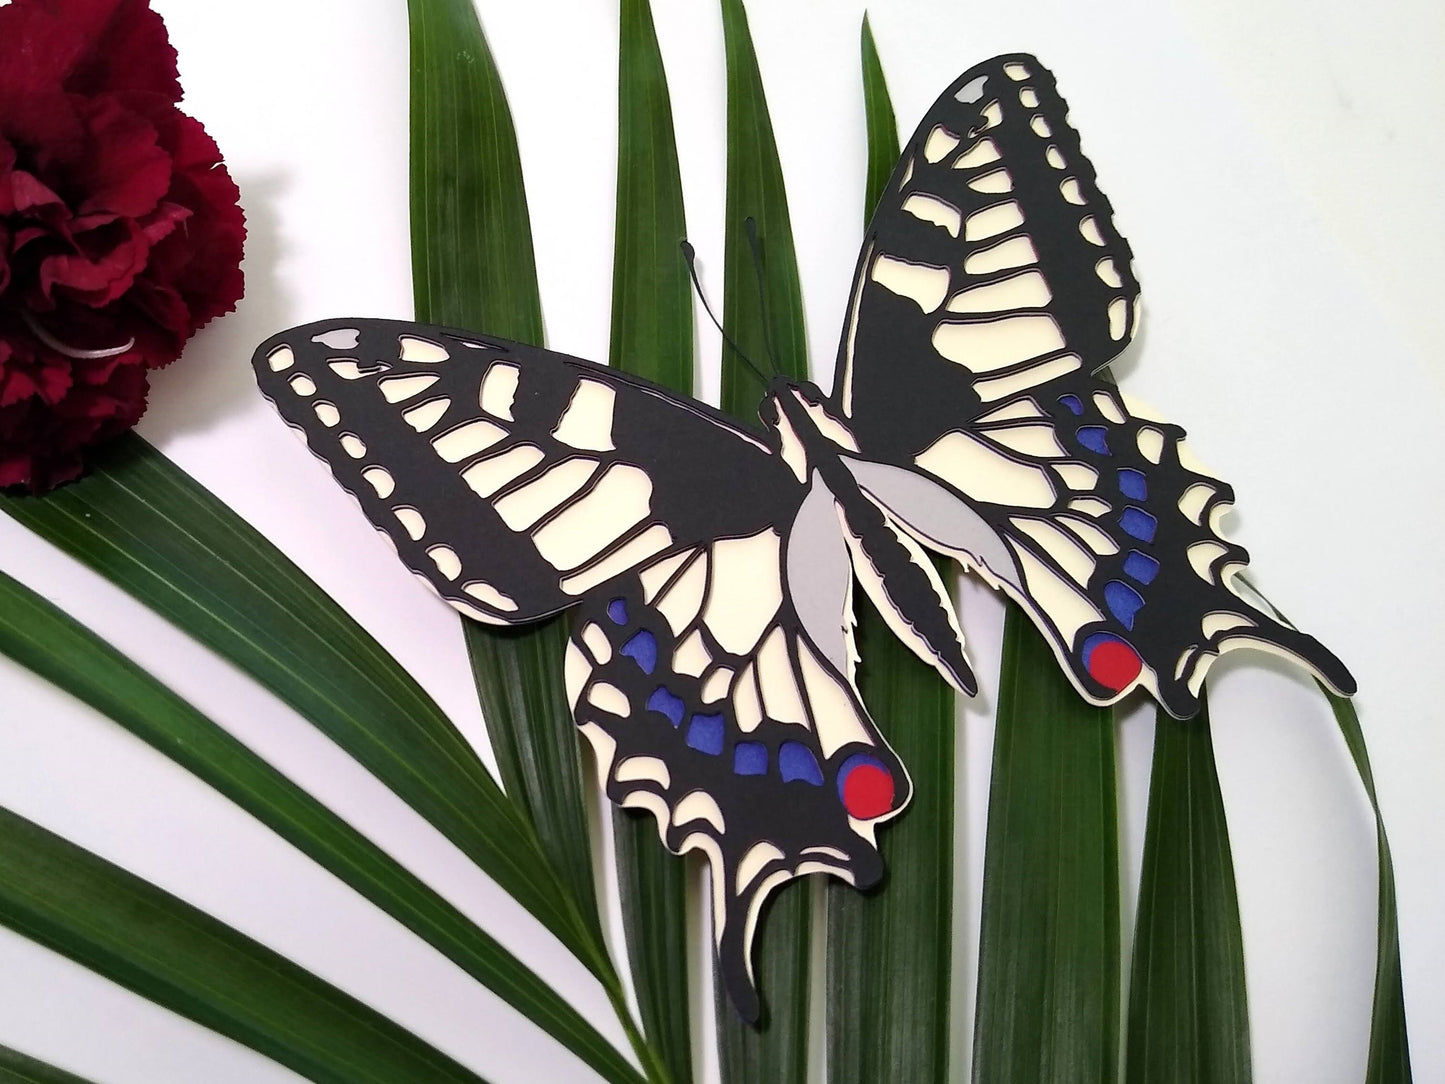 Multi-layered paper butterfly, in the design of a Old World Swallowtail butterfly. It rests on top of a sprig of leaves and beside a dark red flower.